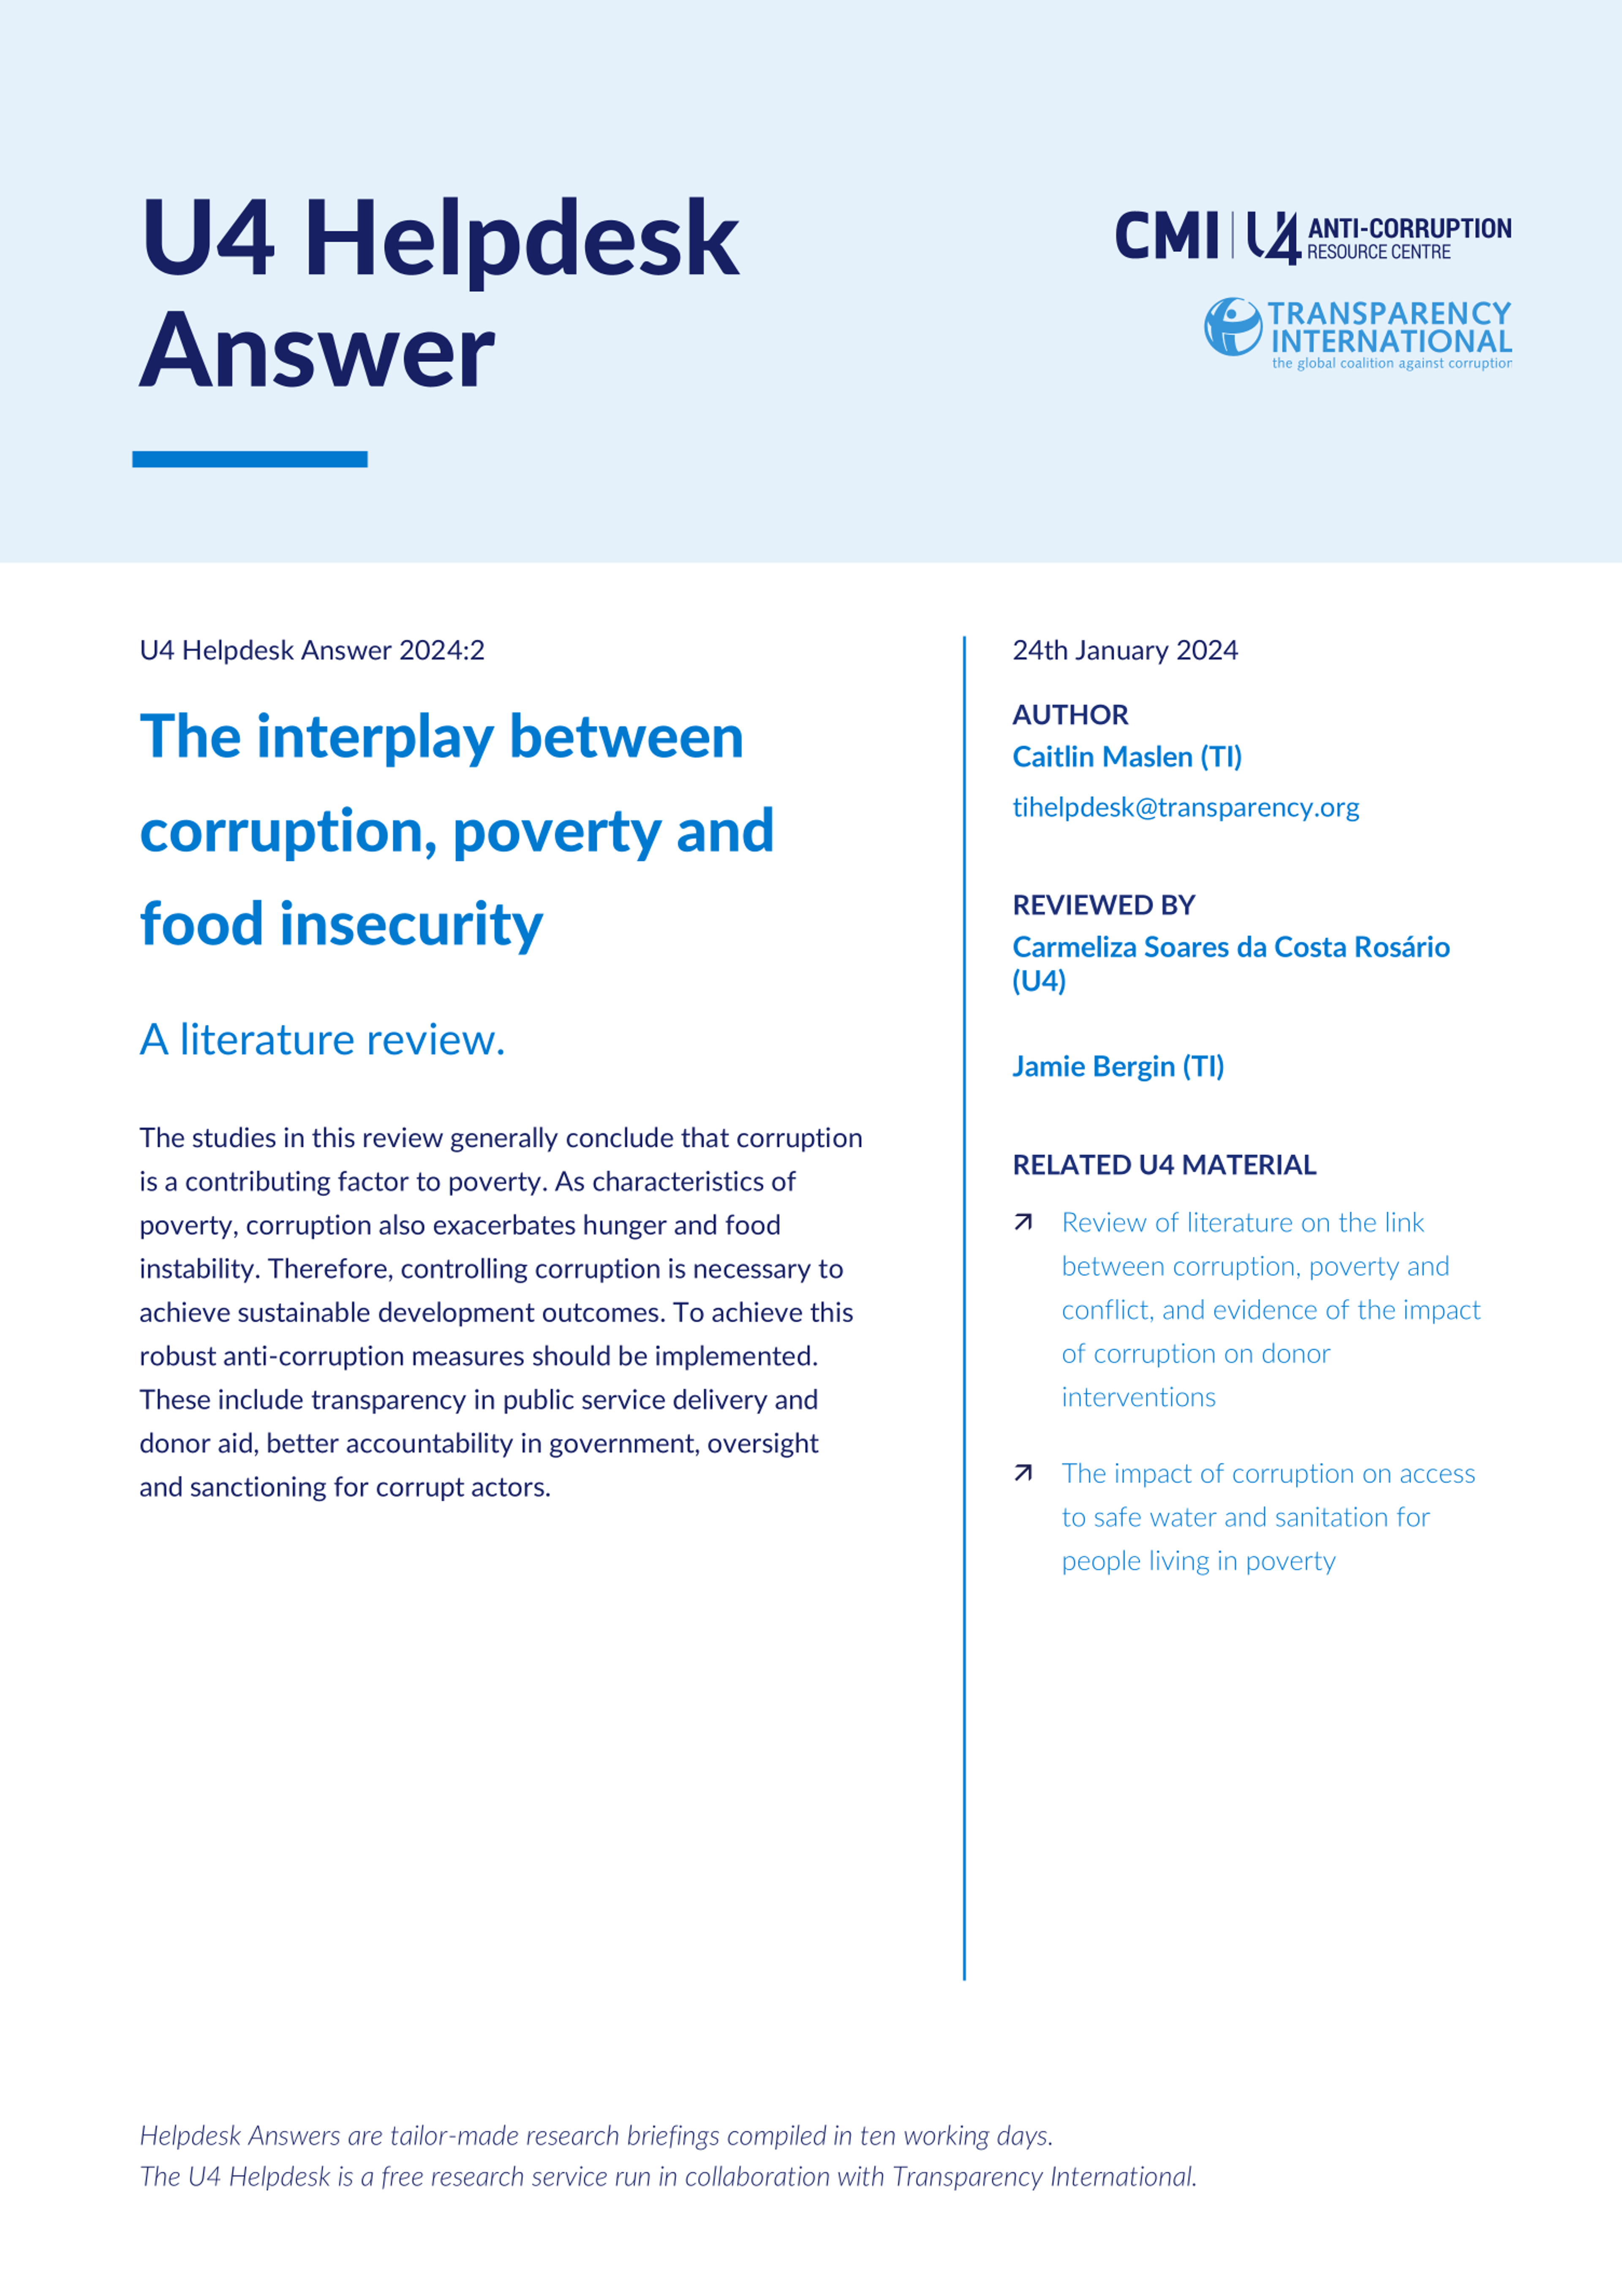 The interplay between corruption, poverty and food insecurity